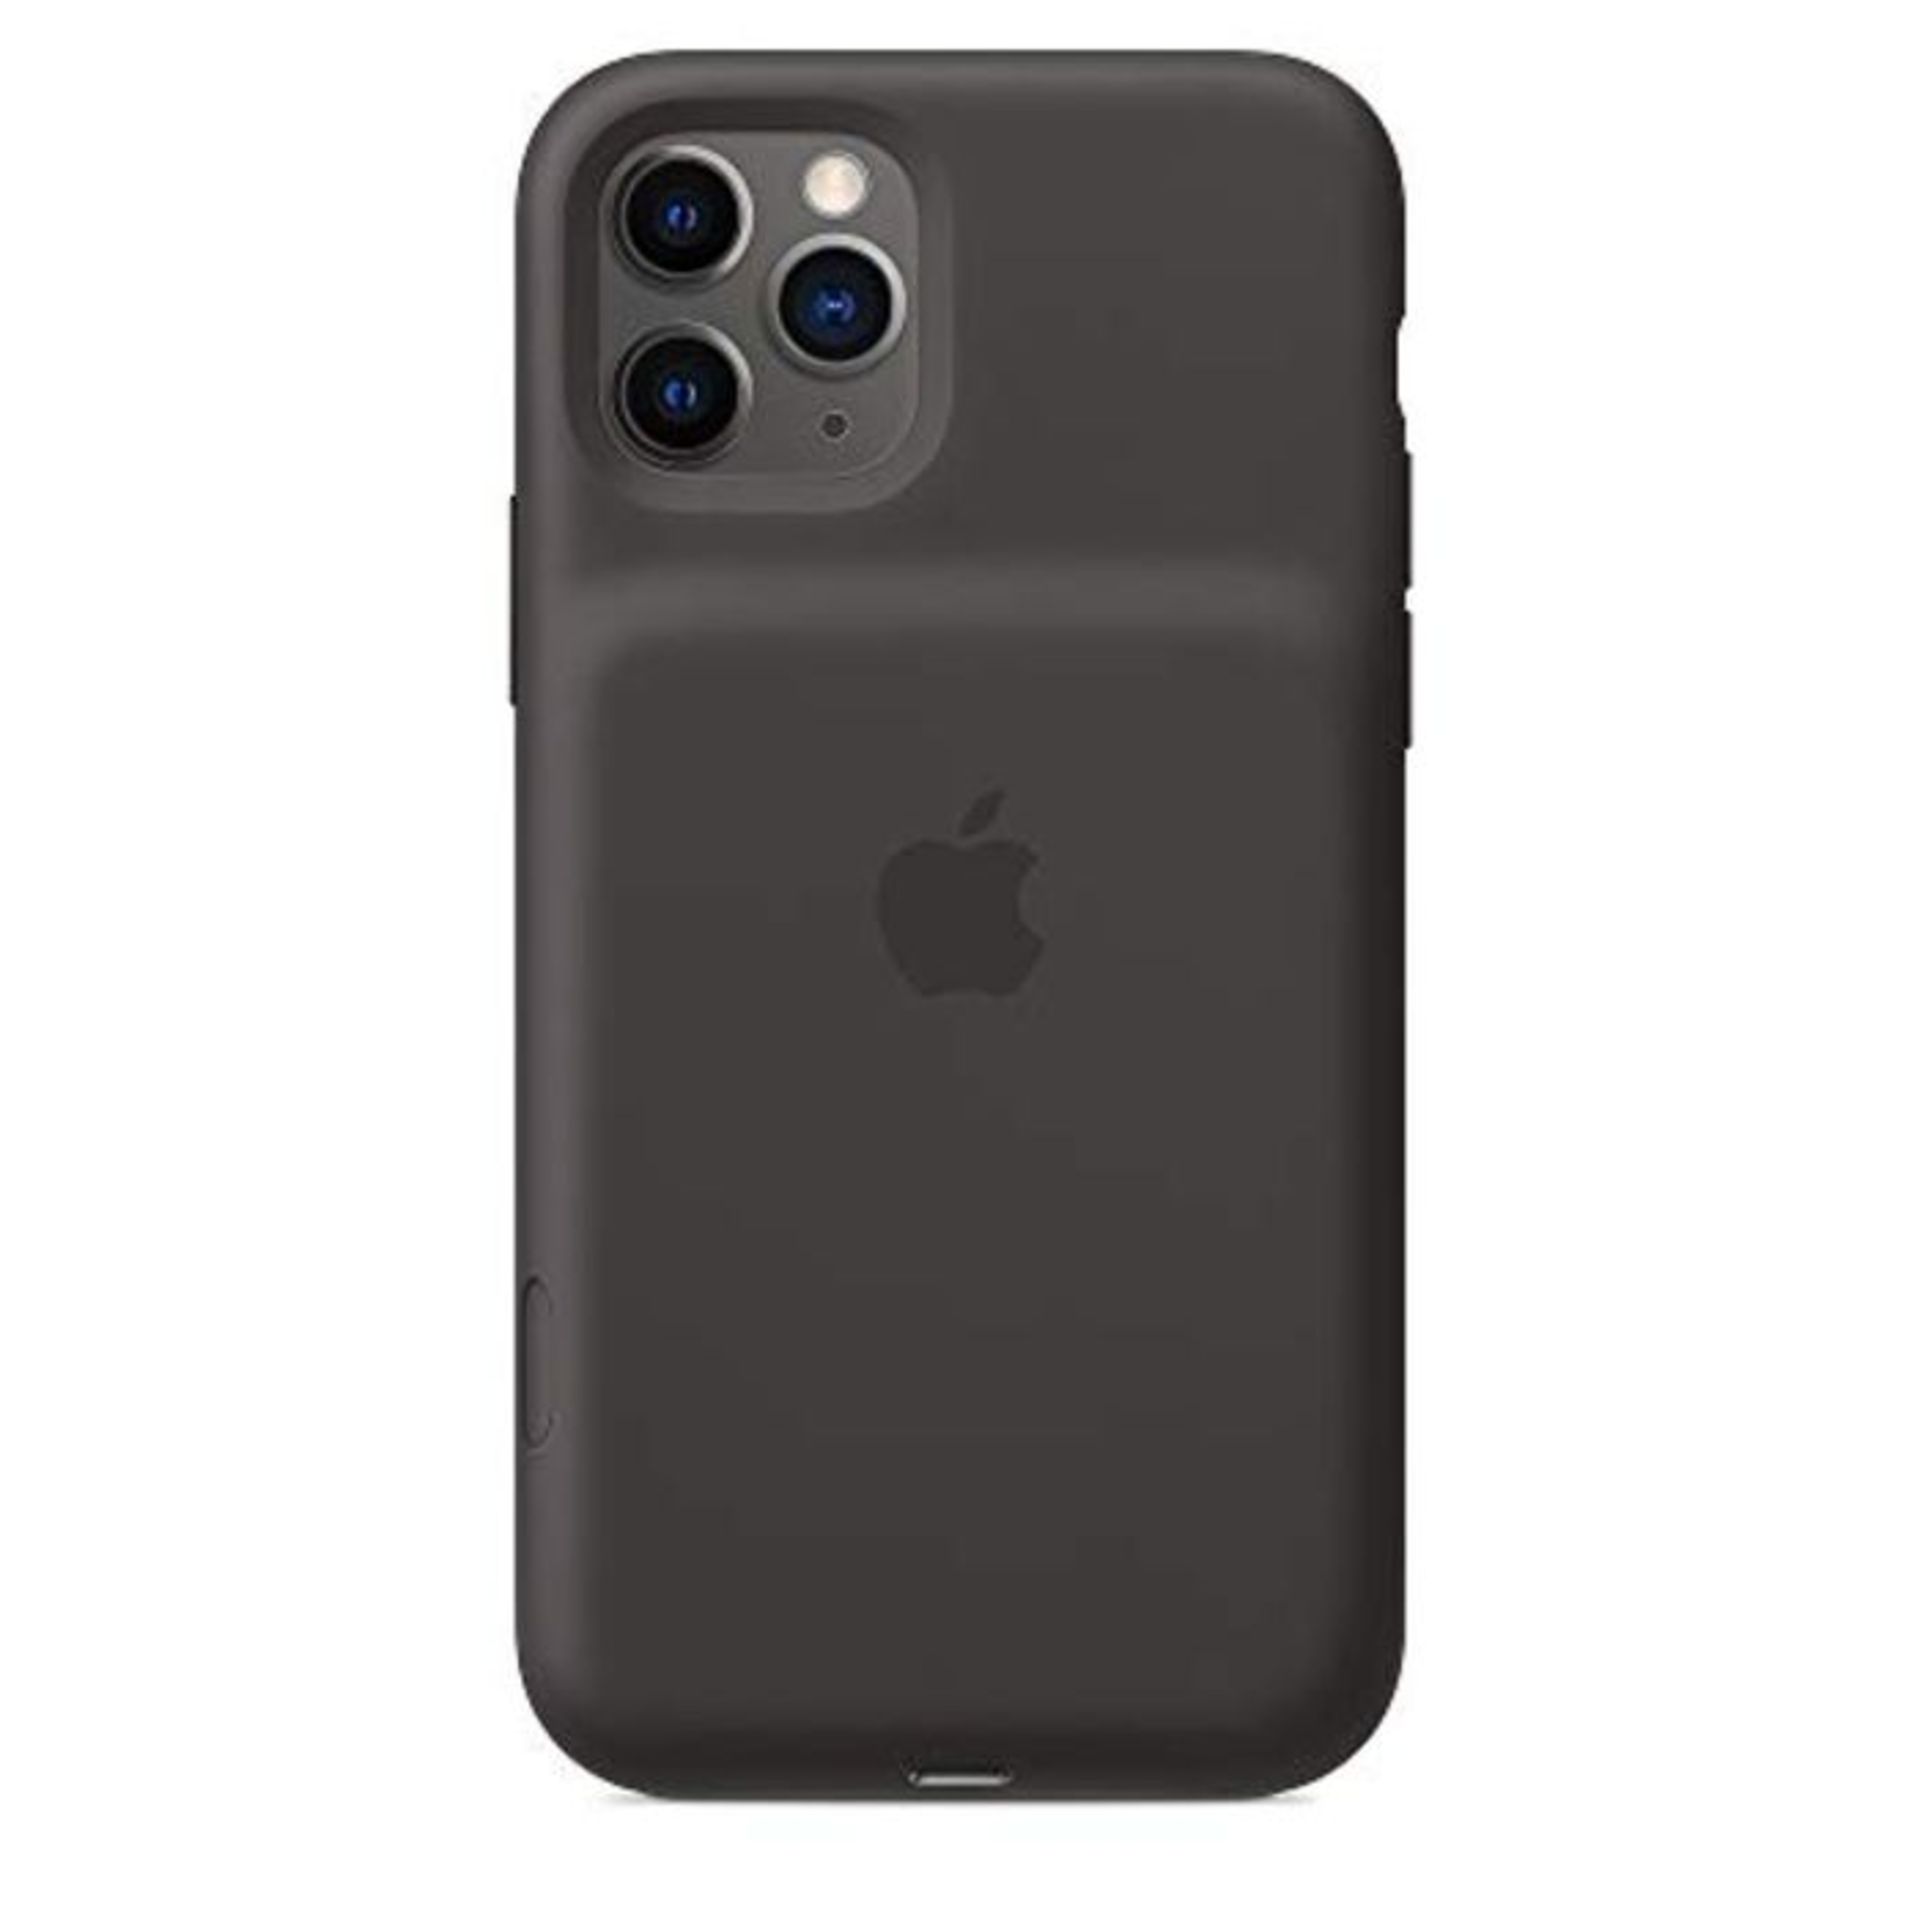 RRP £122.00 [CRACKED] Apple Smart Battery Case with Wireless Charging (for iPhone 11 Pro) - Black - Image 7 of 9